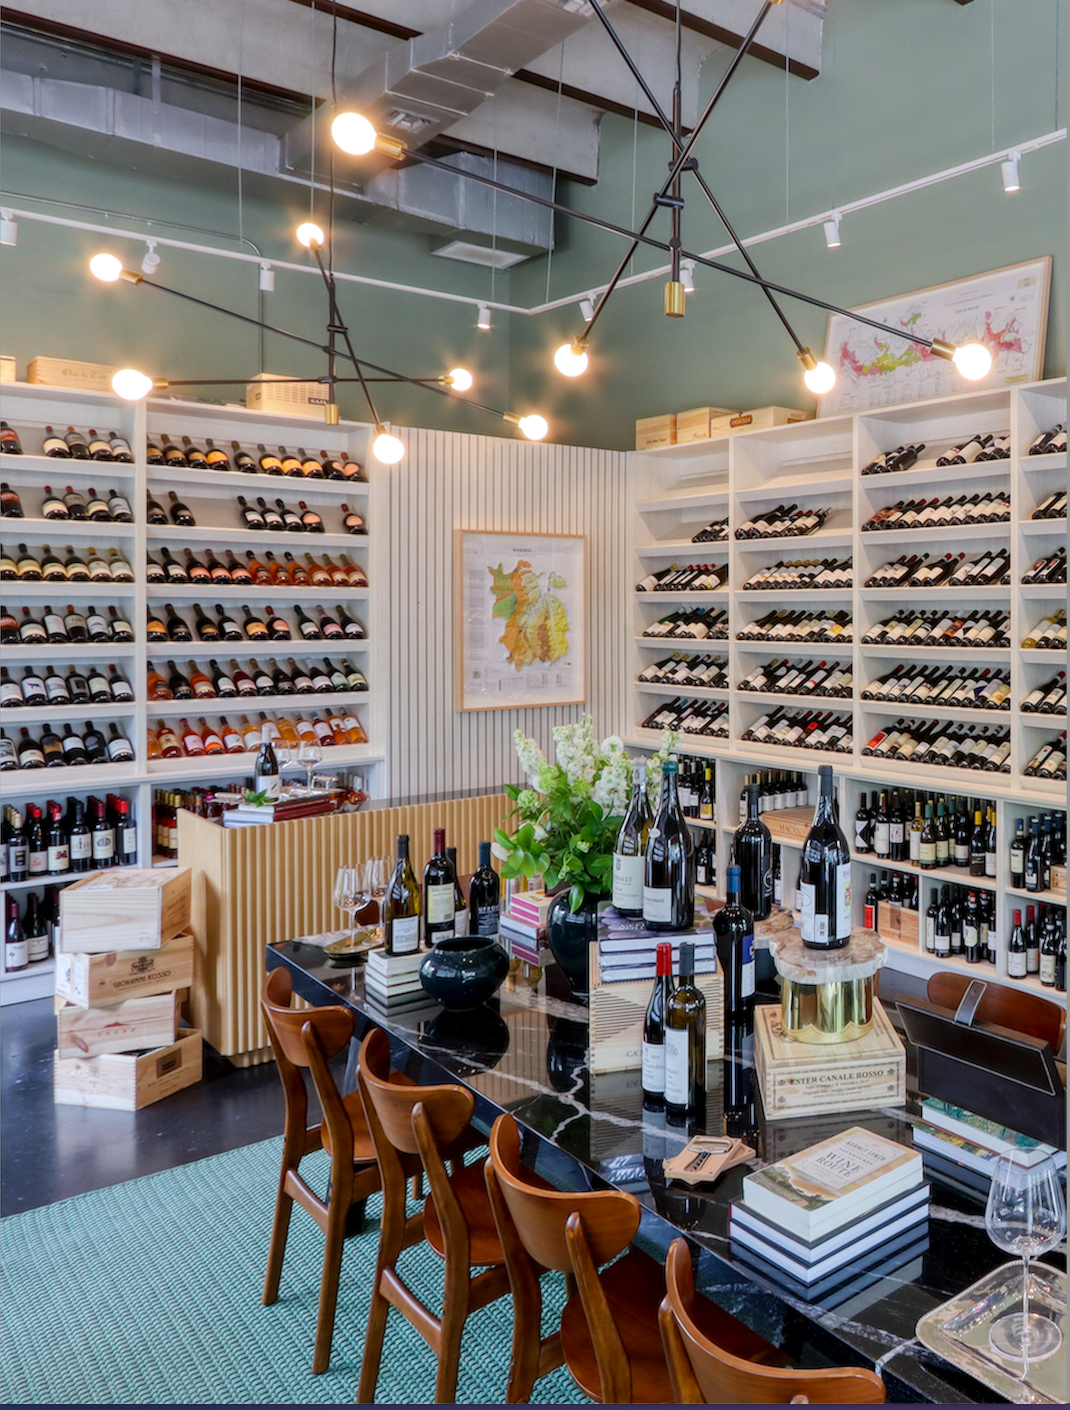 What to look for in a wine shop?